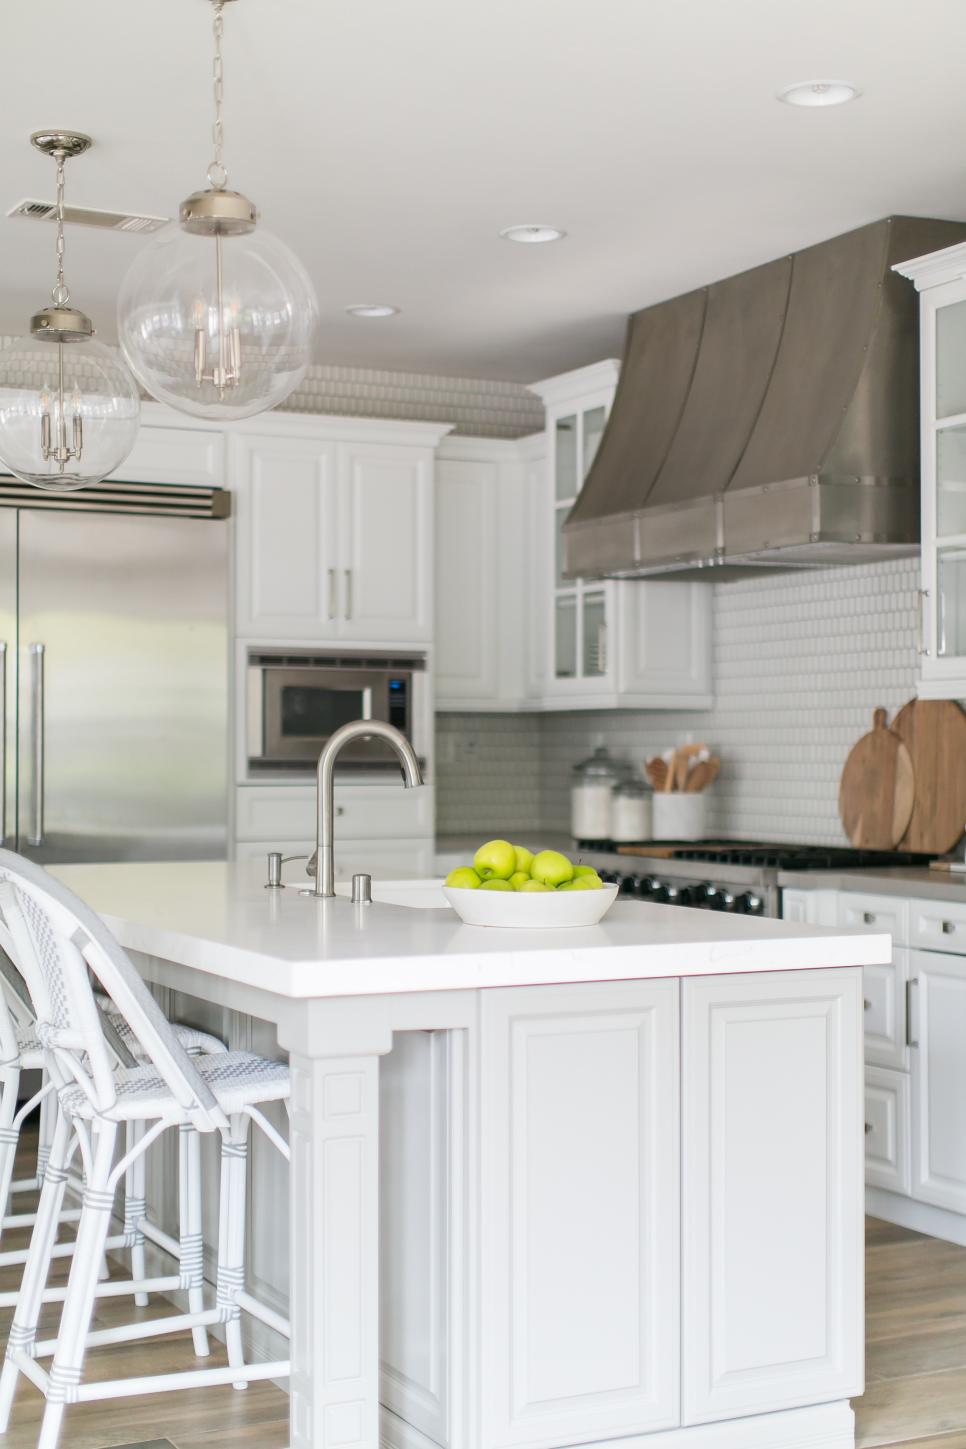 Contemporary White Kitchen With Work Island And Modern Appliances And